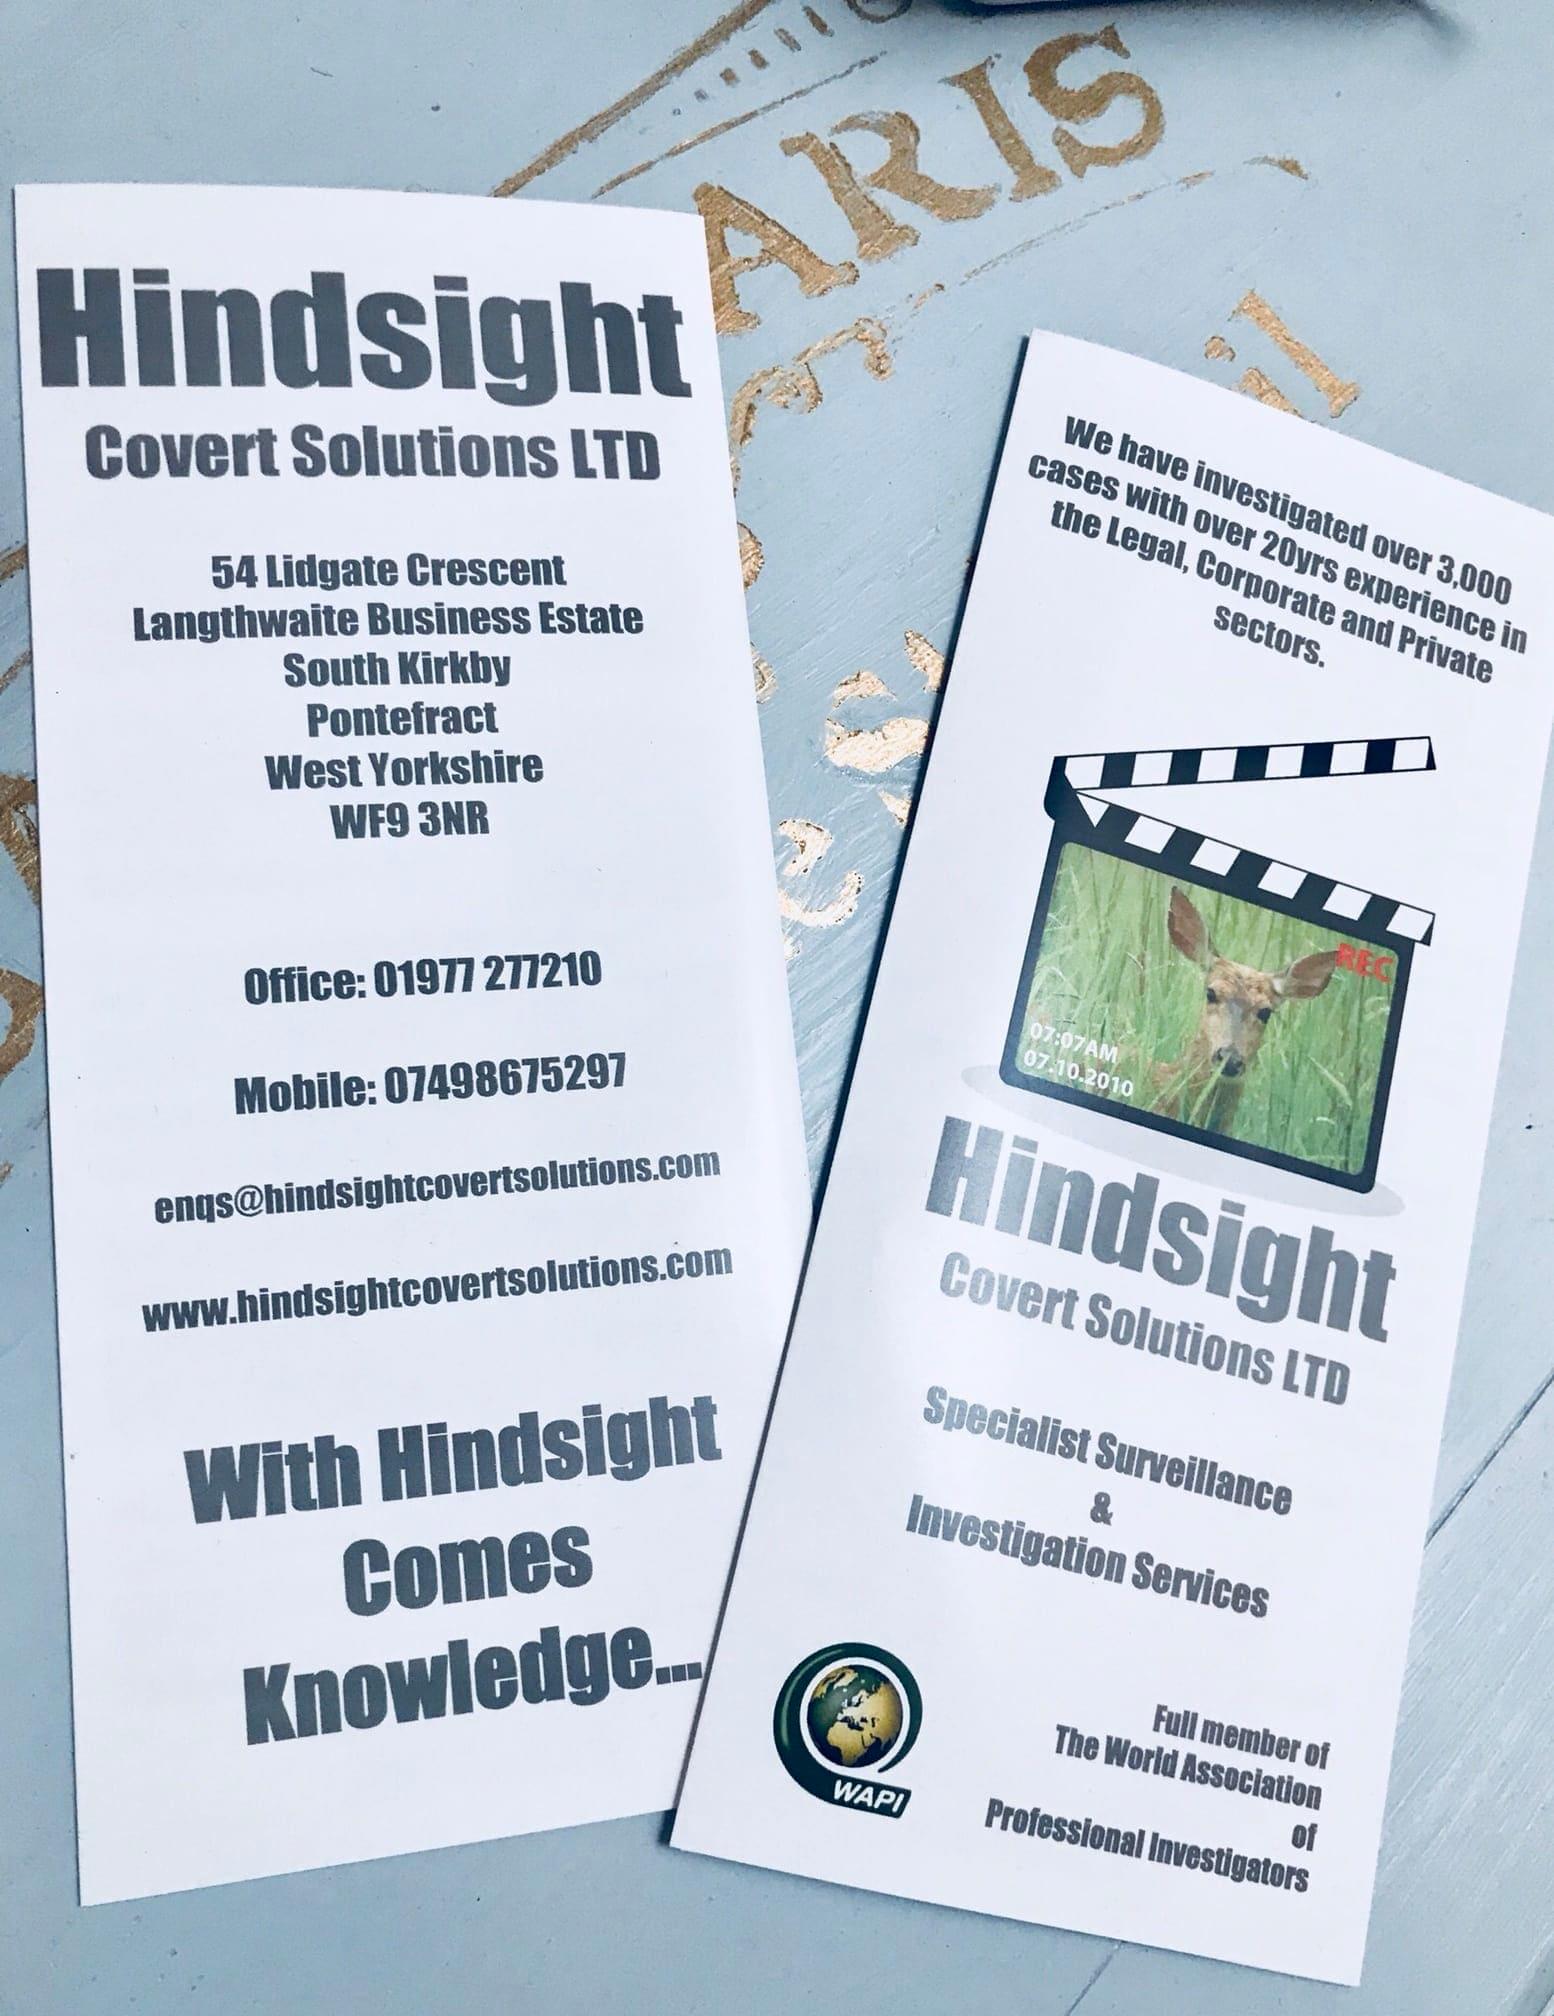 Images Hindsight Covert Solutions Ltd